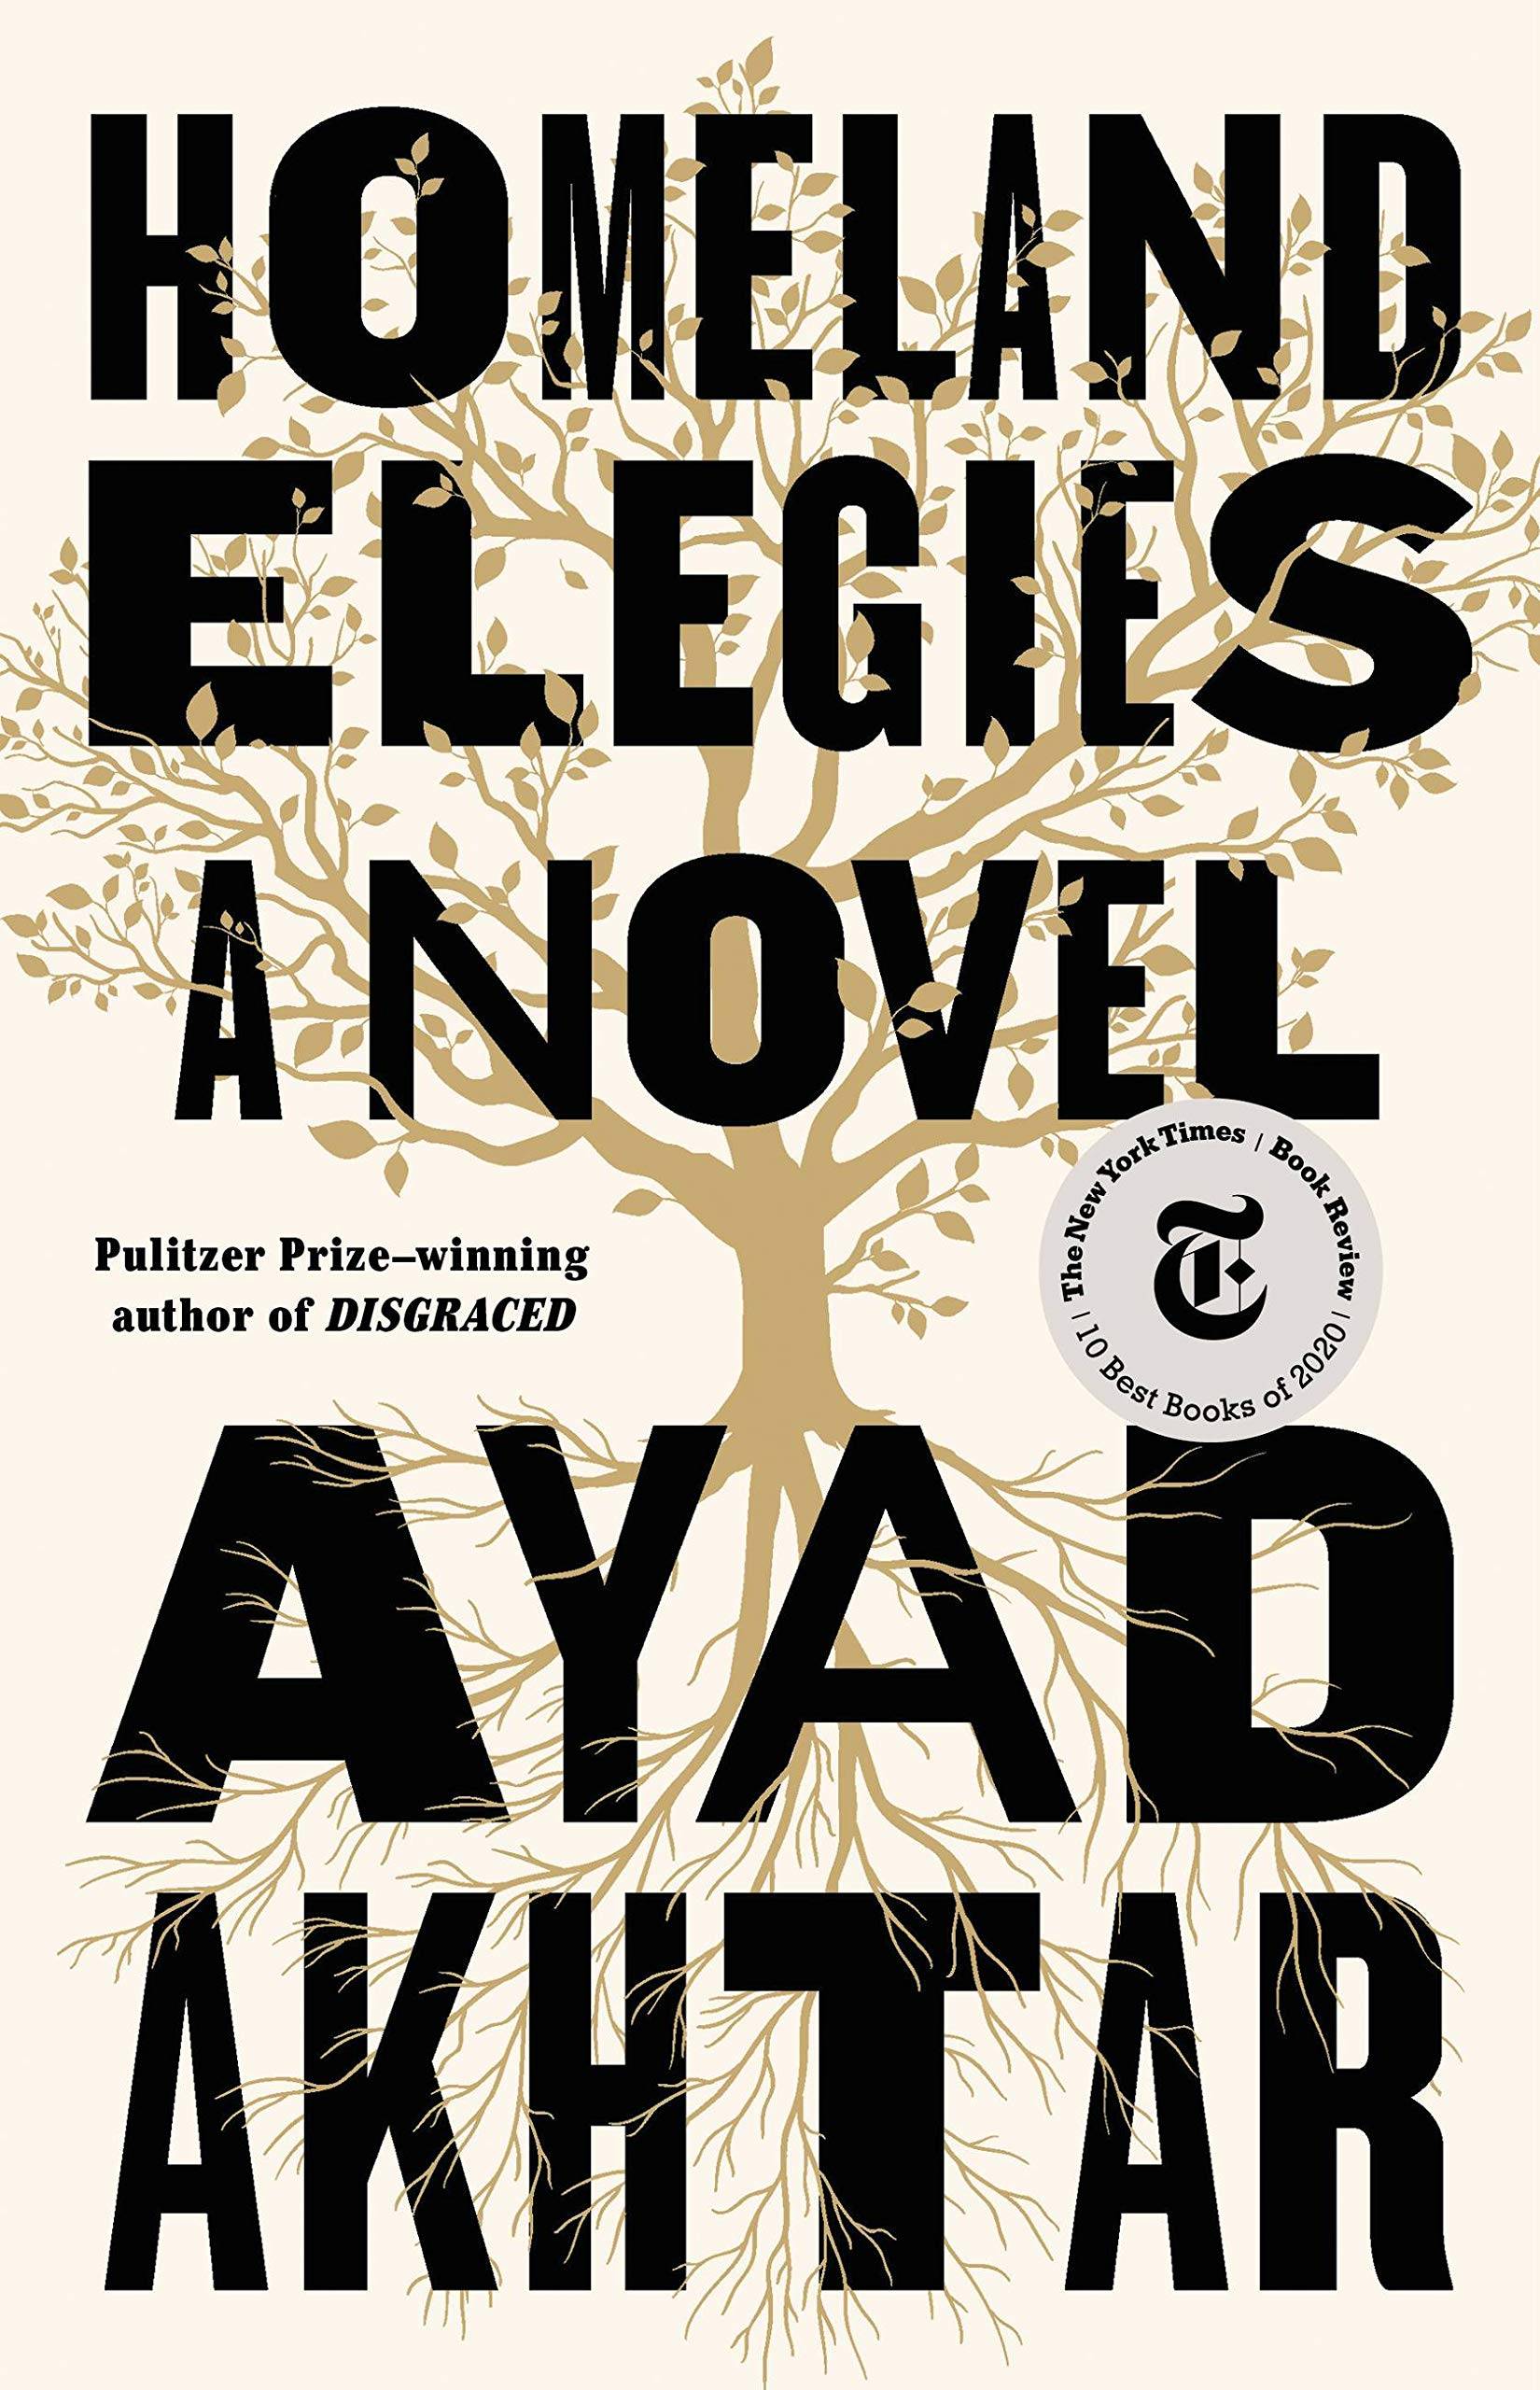 "Homeland Elegies" book cover featuring a large tree in the center with branches reaching upwards and roots reaching downwards.